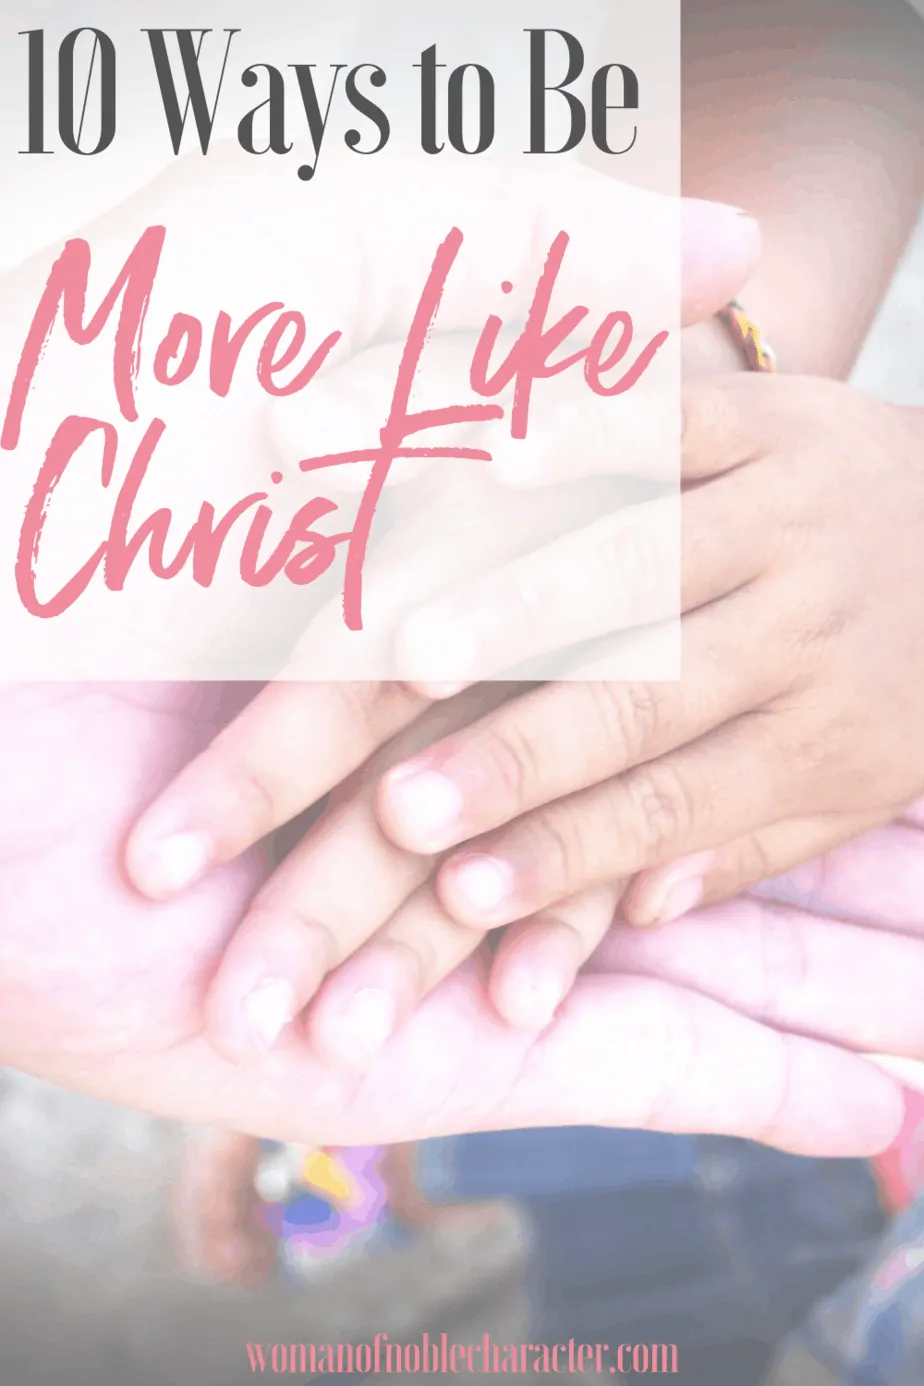 An image of an adult hand with two sets of smaller hands on top of it and a text overlay that says 10 Ways to Be More Like Christ